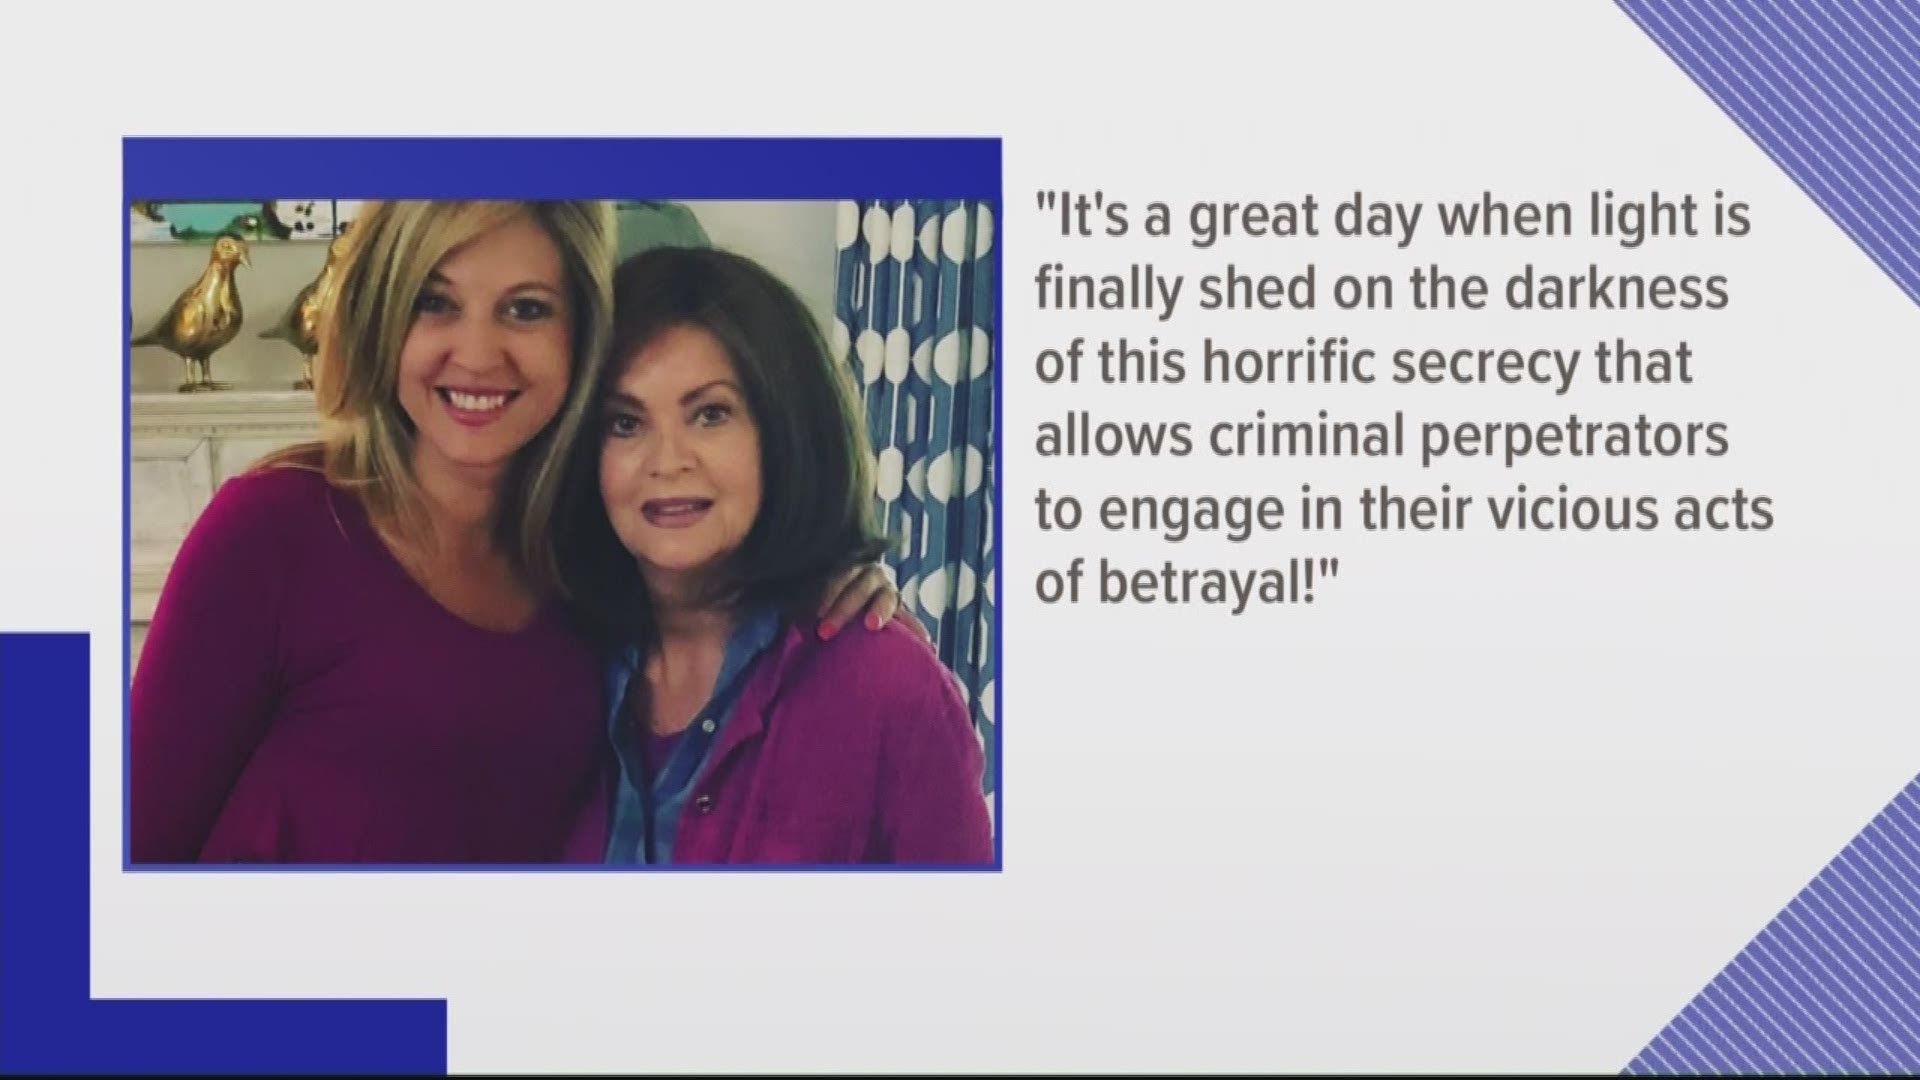 During a powerful commentary on First Coast News on Thursday, anchor Heather Crawford shared a personal story about sexual abuse in her family. Her words came on the heels of more than 200 sexual assault victims of Larry Nassar being honored at Wednesday's ESPY Awards.